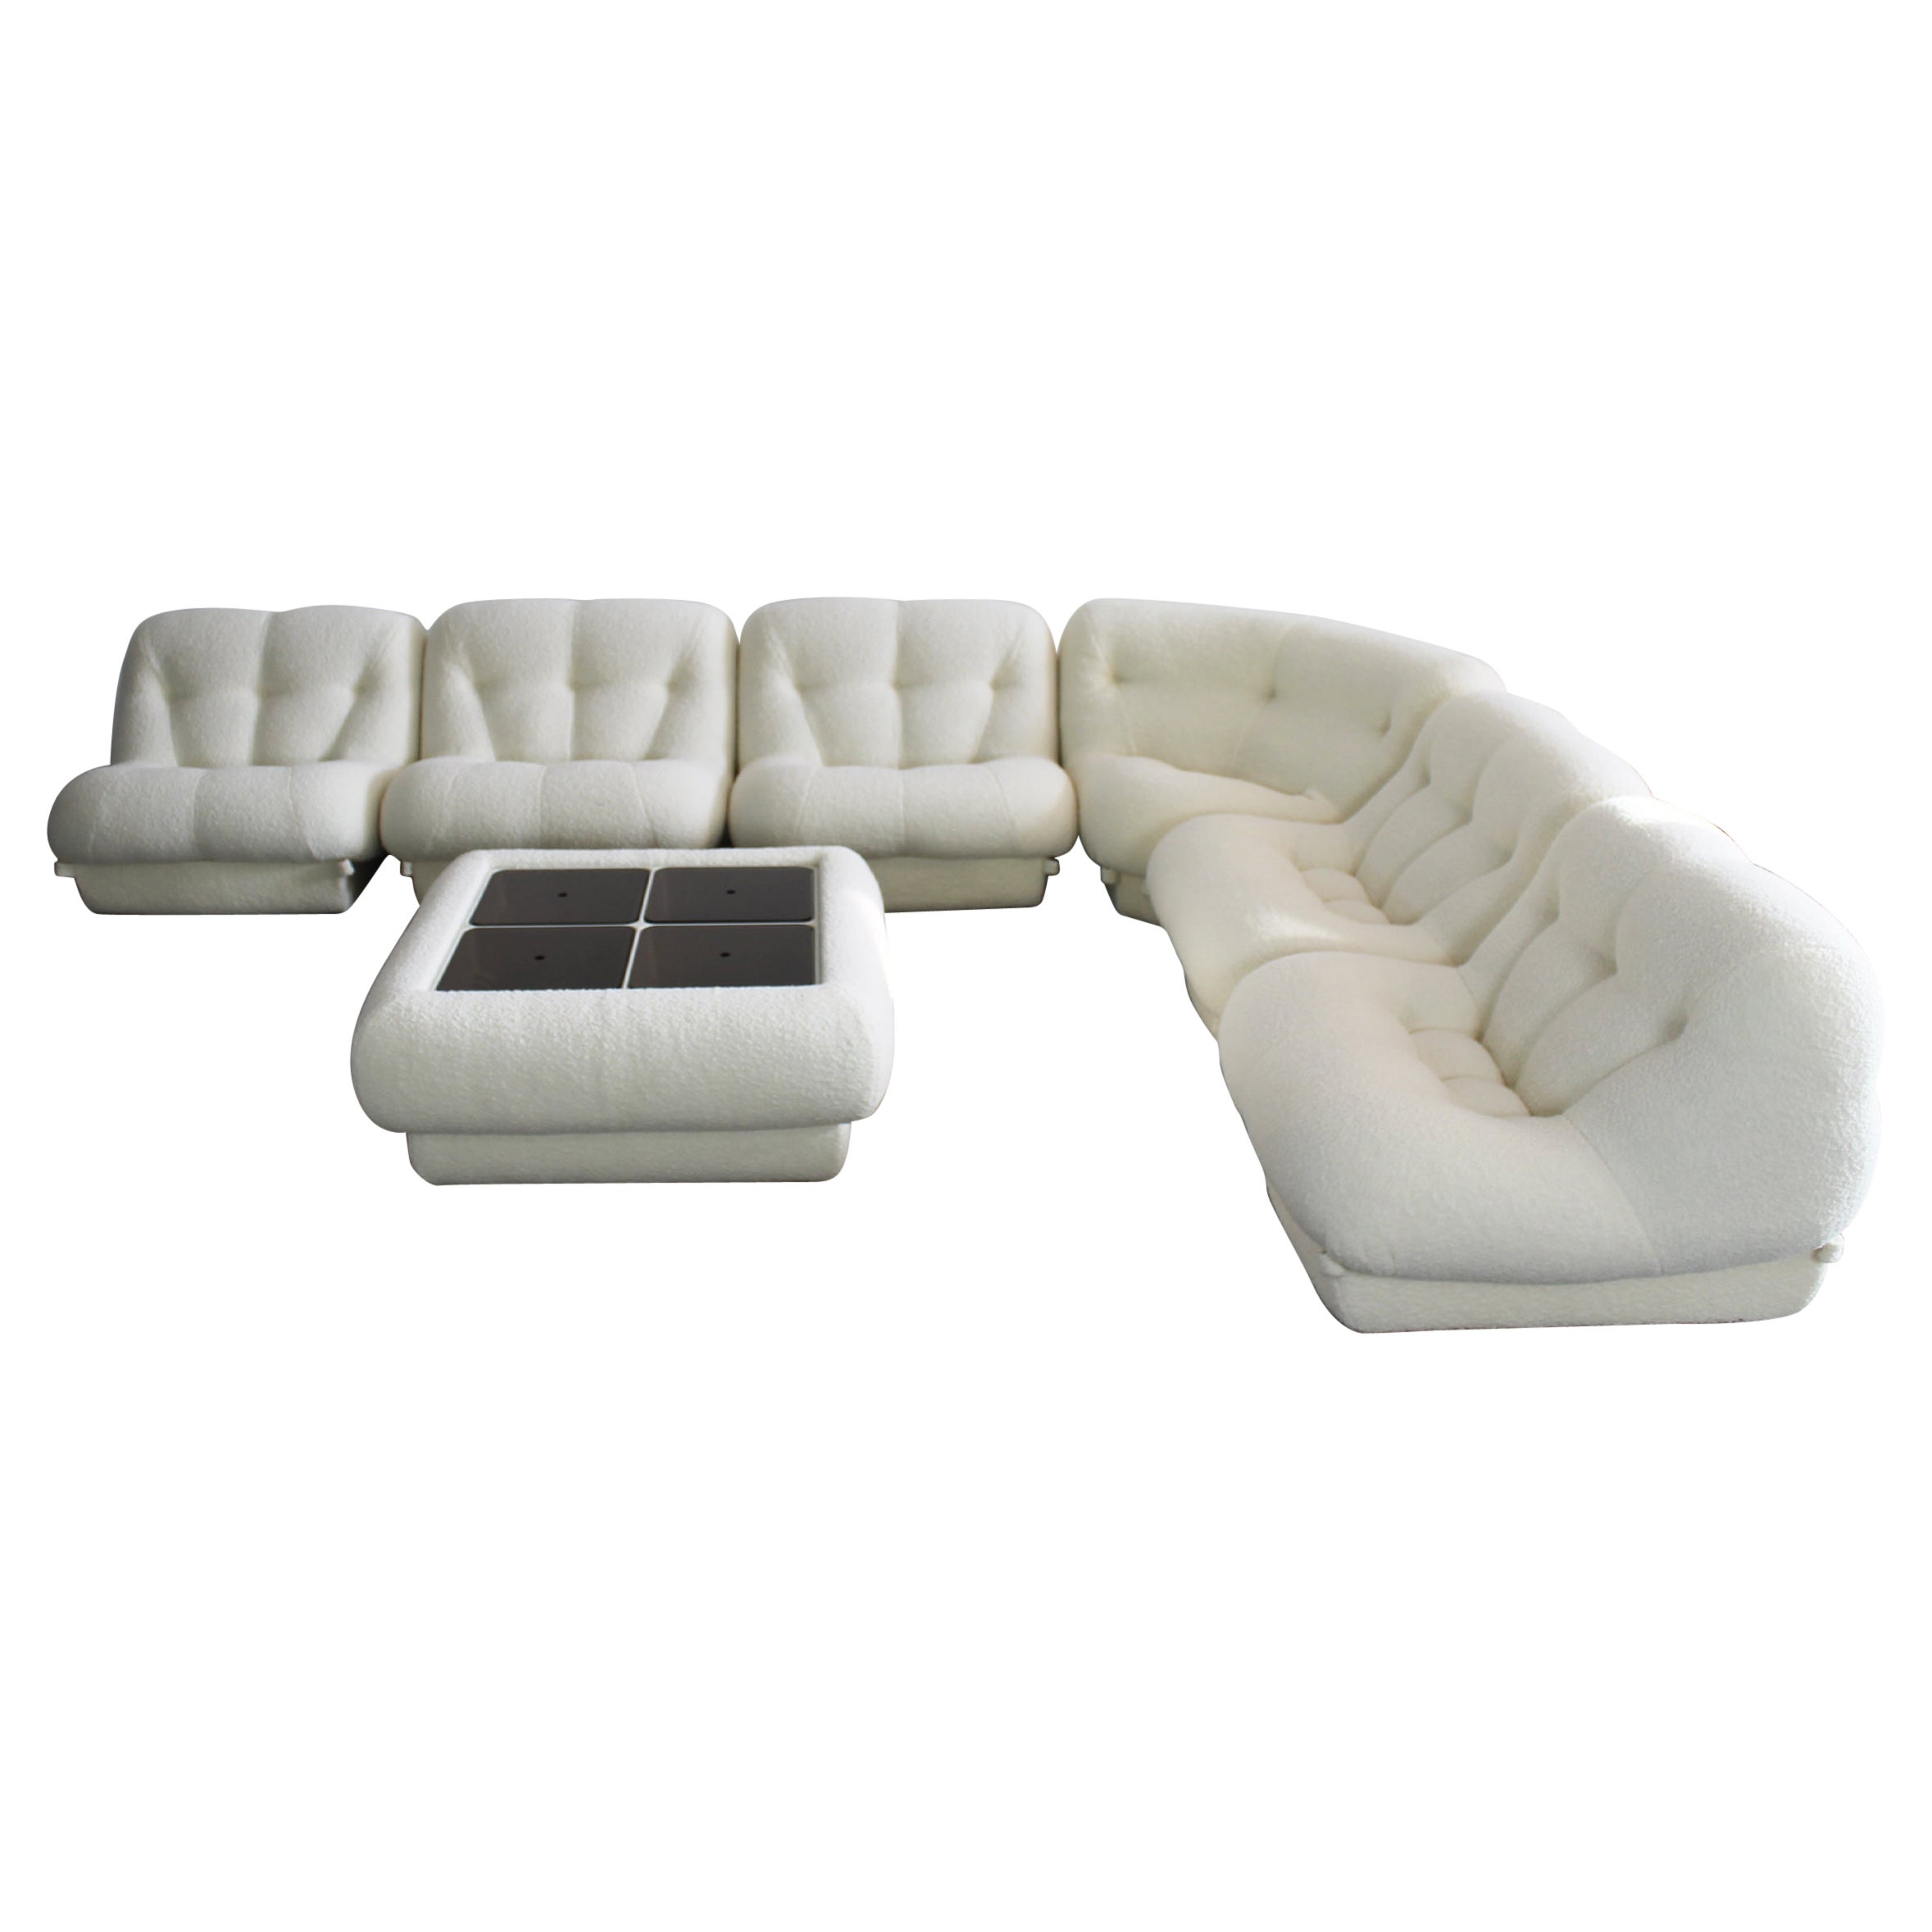 Rino Maturi Nuvolone Living Room Set in White Boucle by MIMO Padova 1970s Italy For Sale